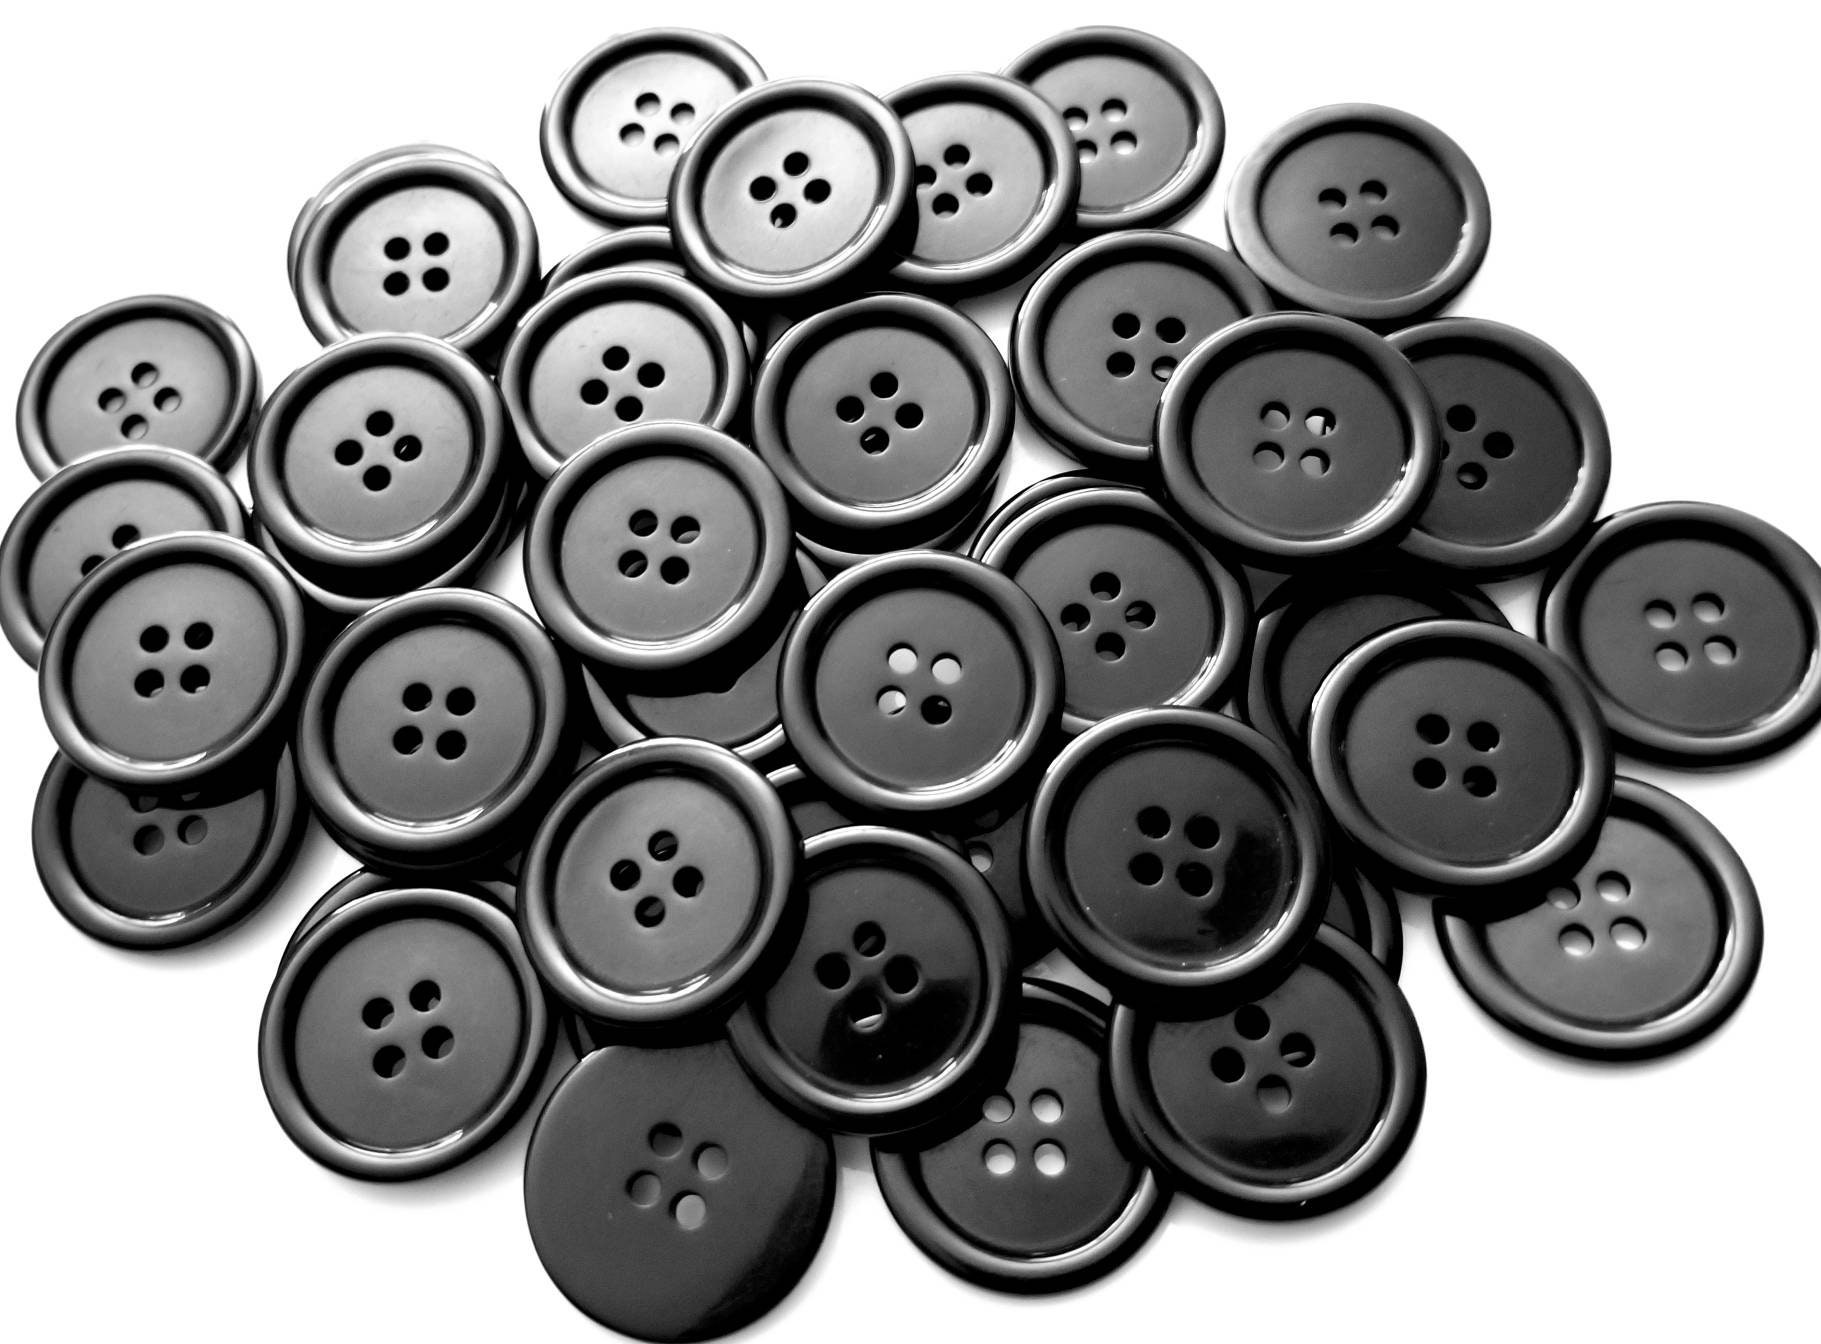  Black Buttons 32L Round Button 4 Hole 0.80 inch Sewing Plastic  Buttons for Crafts Shirt Buttons Suit Button Decorative Buttons for Clothes  Pack of 12